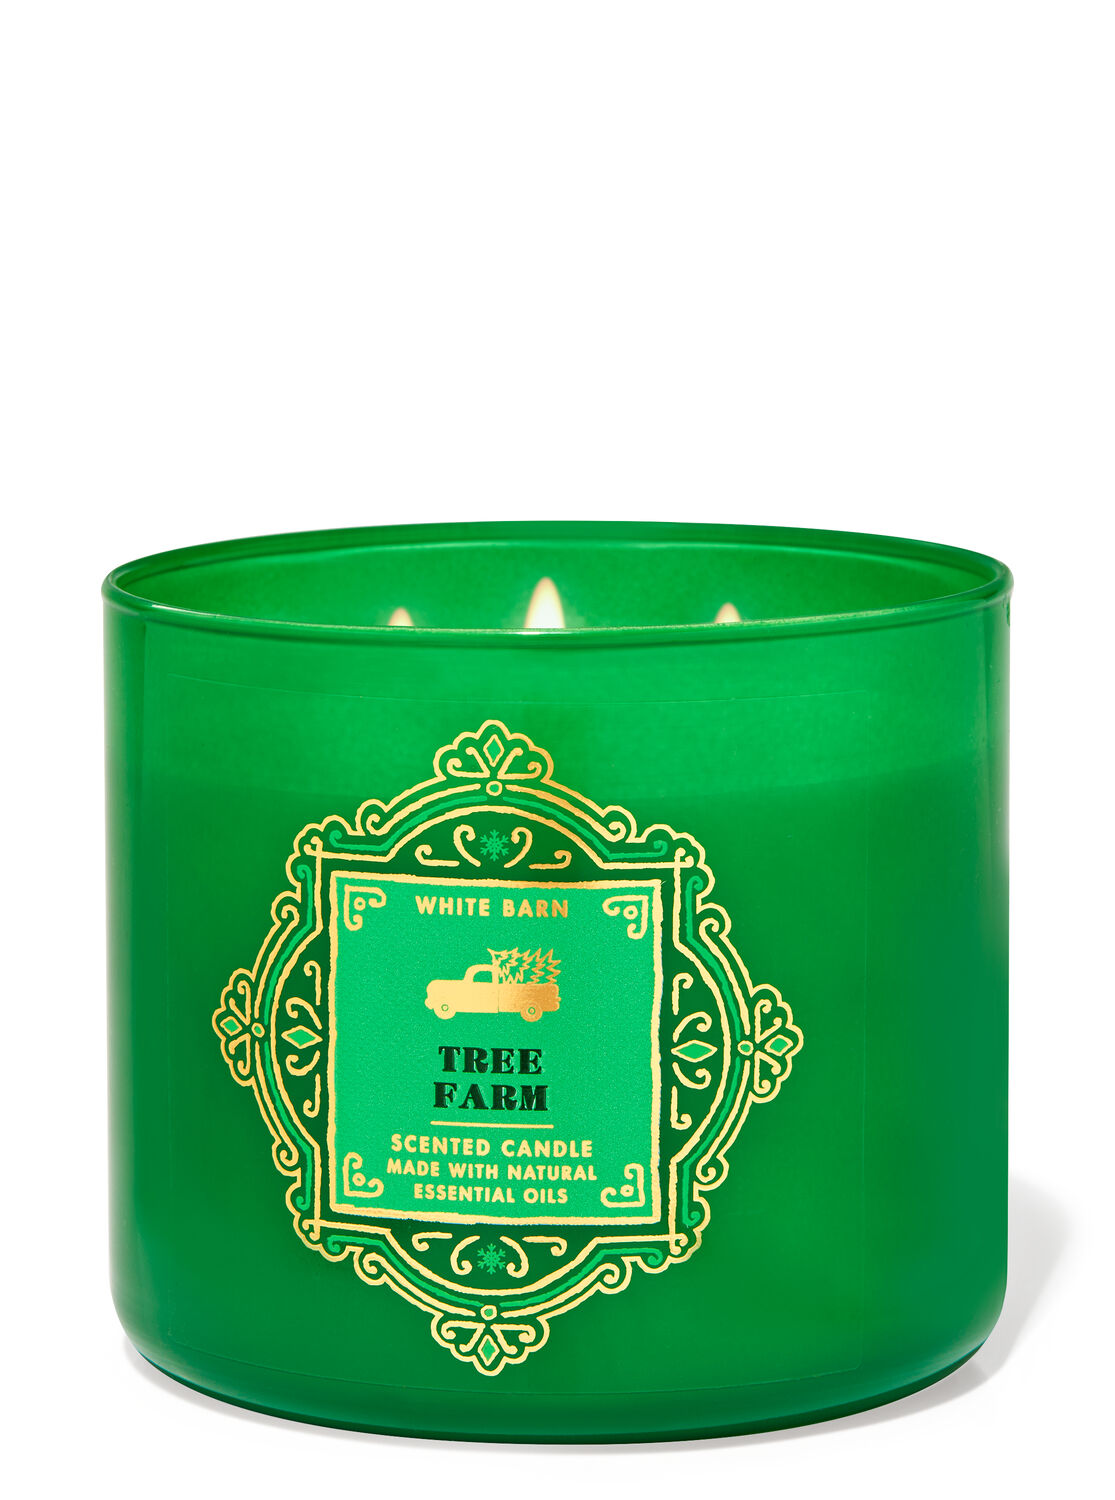 NEW 1 BATH & BODY WORKS TREE FARM SCENTED 3-WICK LARGE 14.5 OZ FILLED CANDLE 